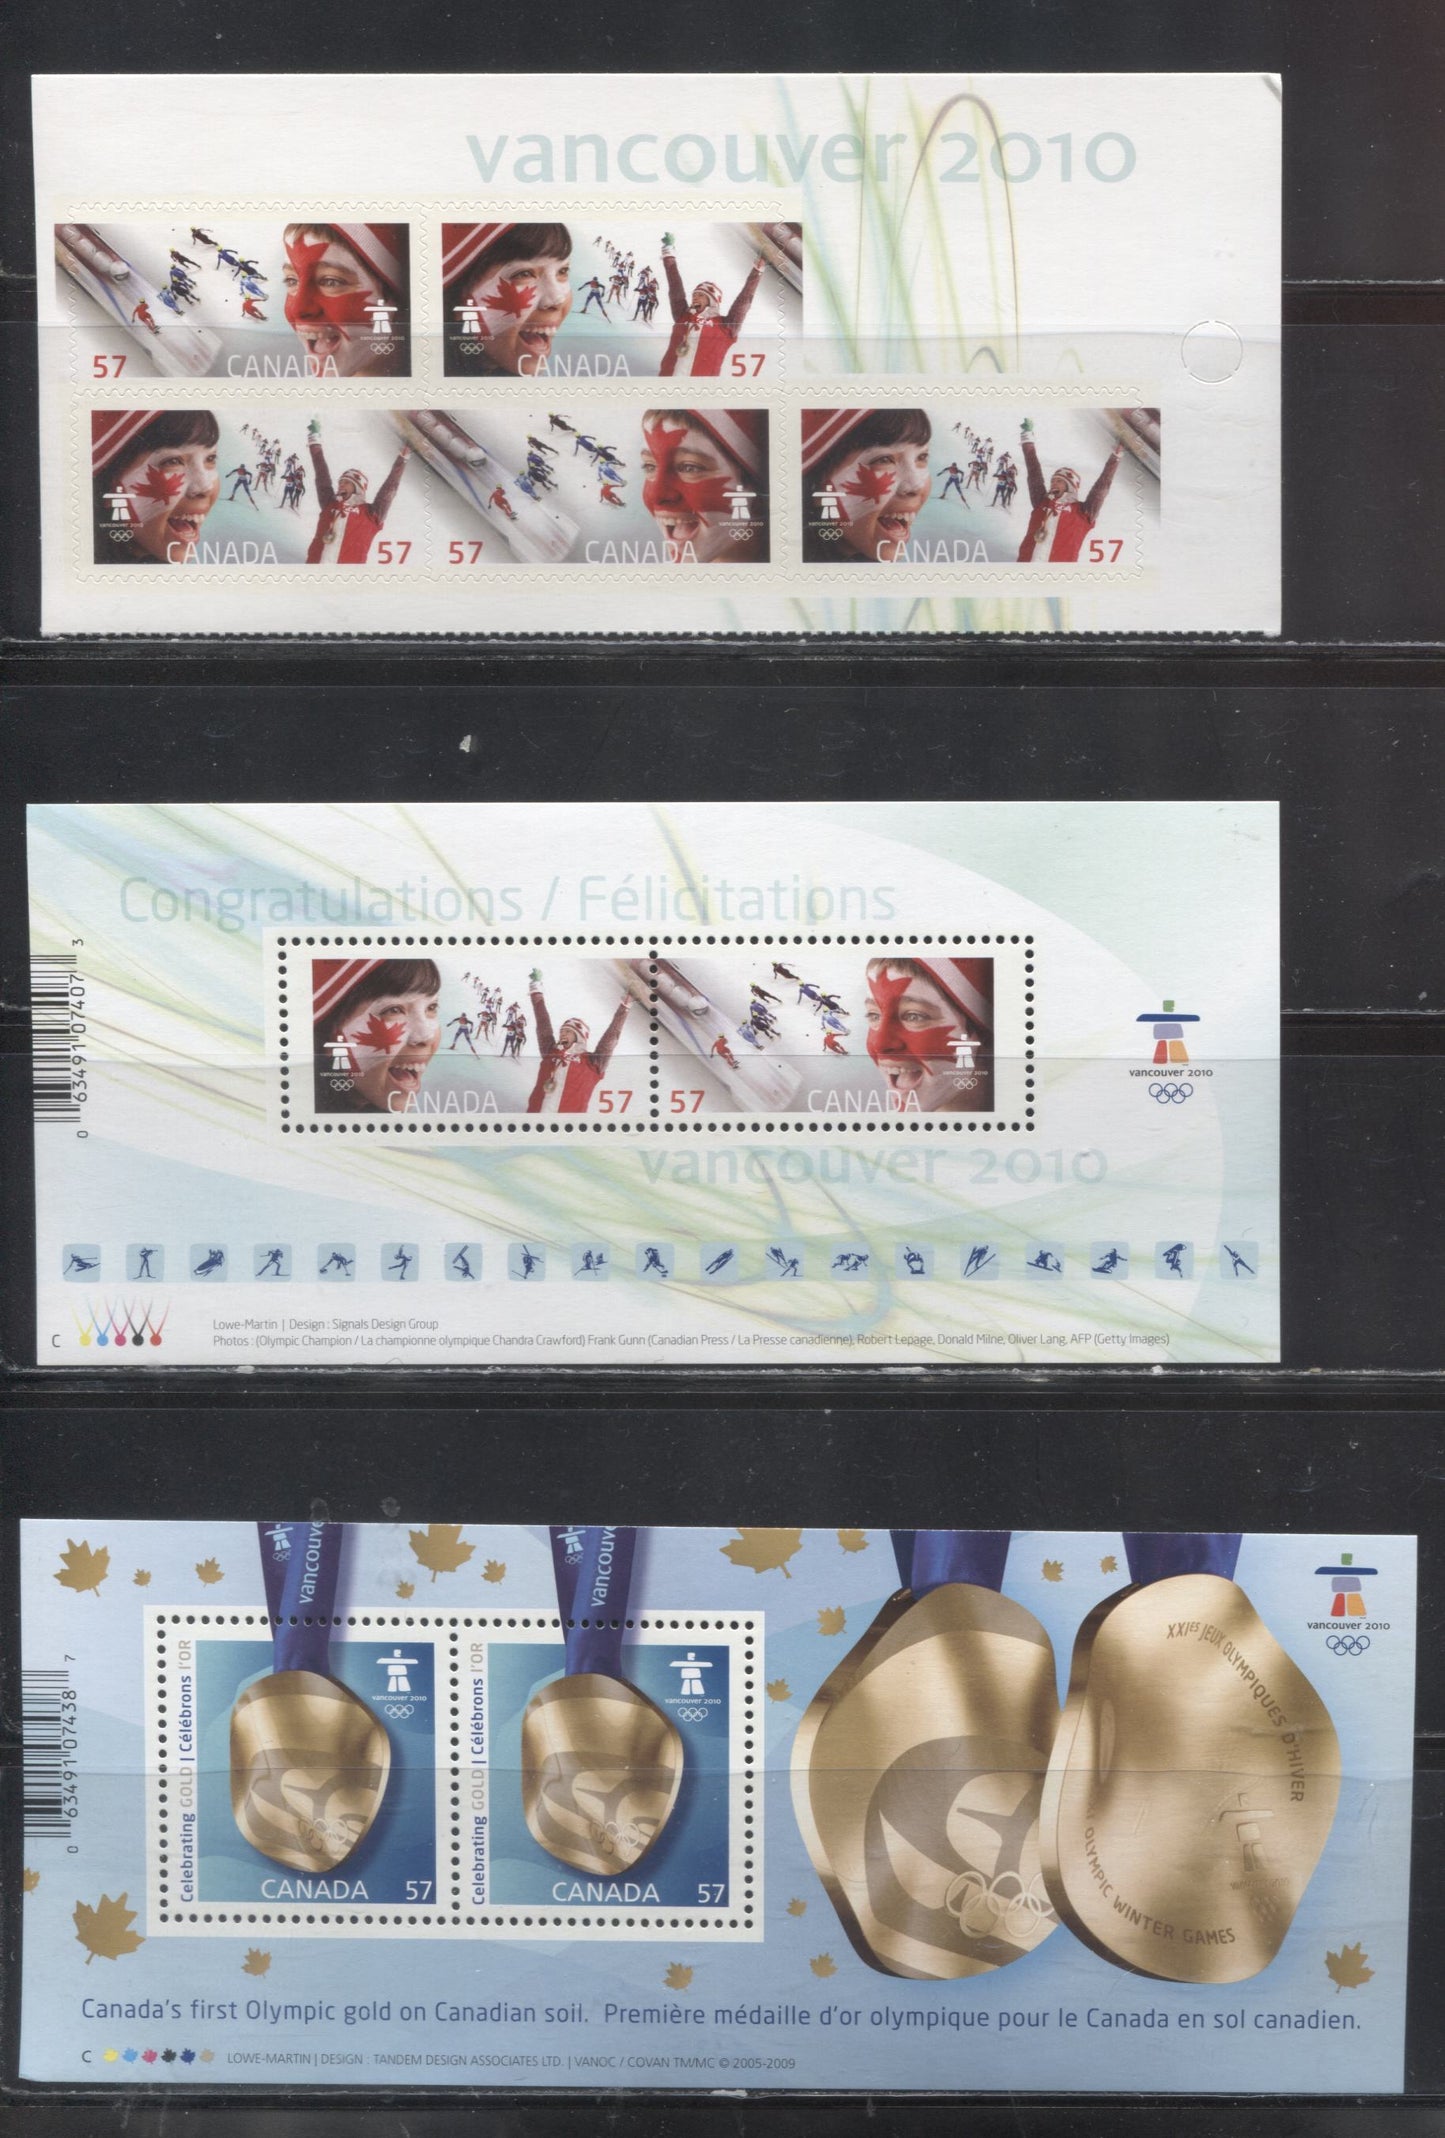 Lot 29 Canada #2371, 2372a, 2373, 2375a 2010 Canada Strikes Gold & Celebrating the Olympic Spirit Issues, VFNH Souvenir Sheets and Booklet Panes of 4 and 5 on LF Paper